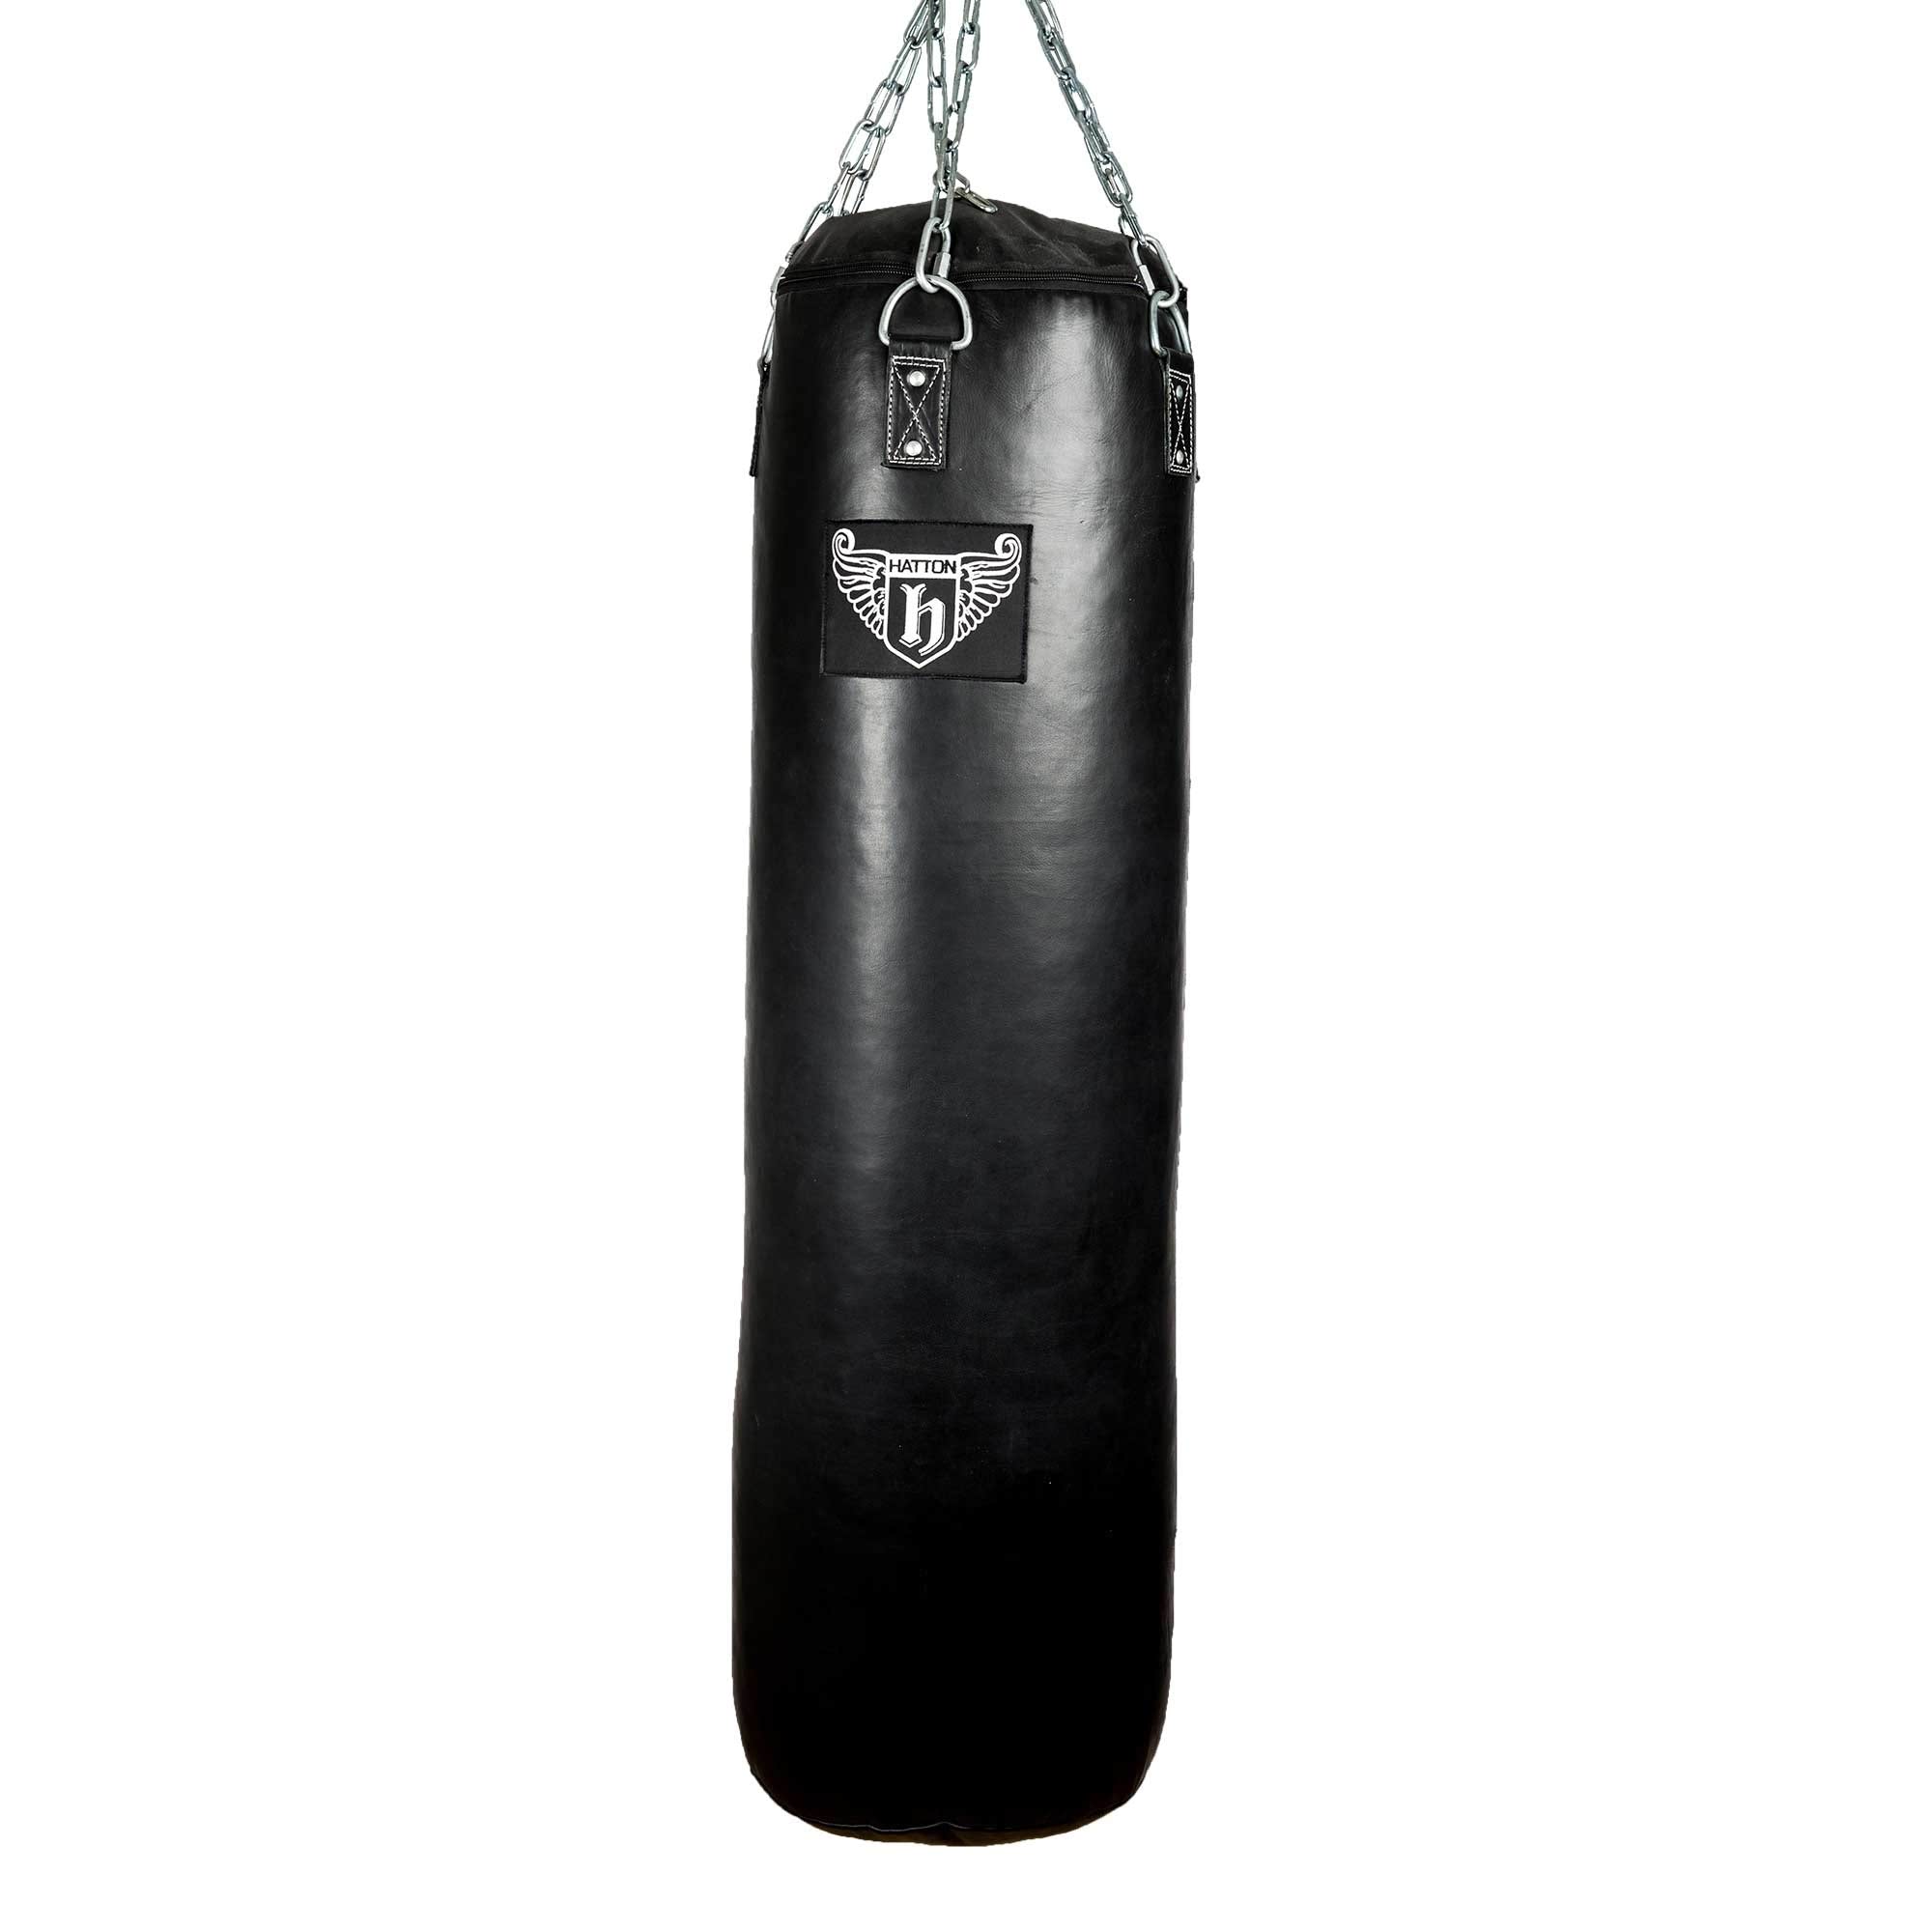 What are punching bags?